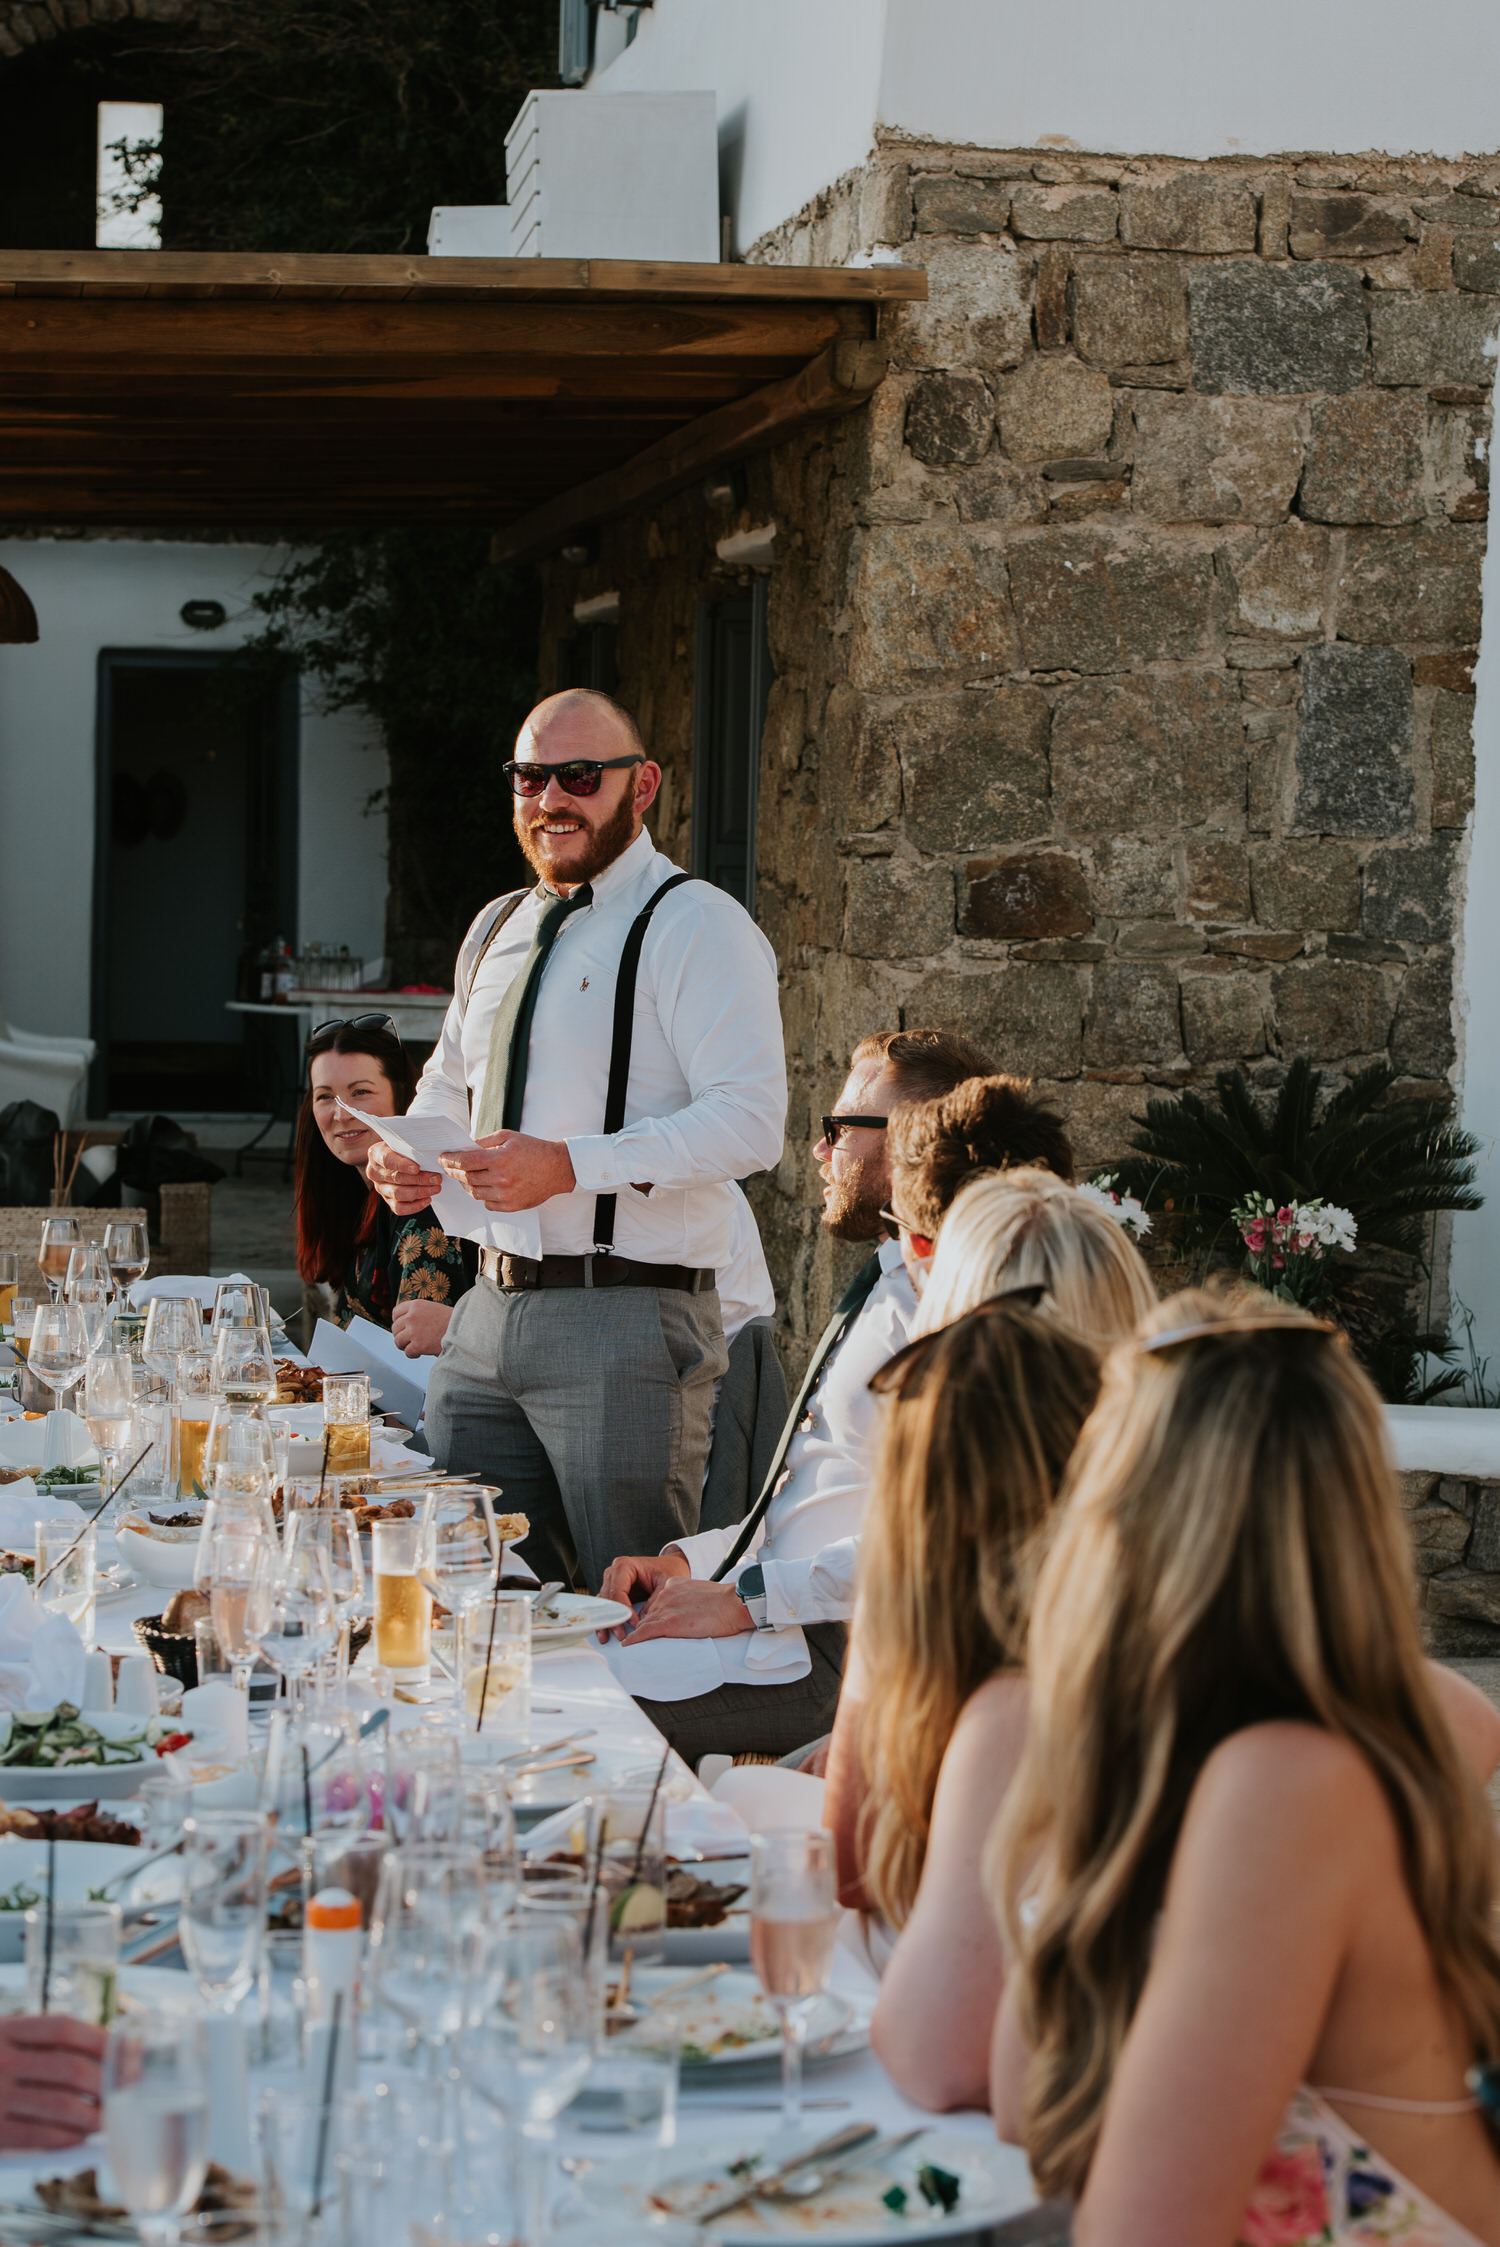 Mykonos wedding photographer: accent on best man in sunset light standing at the table during his speech.